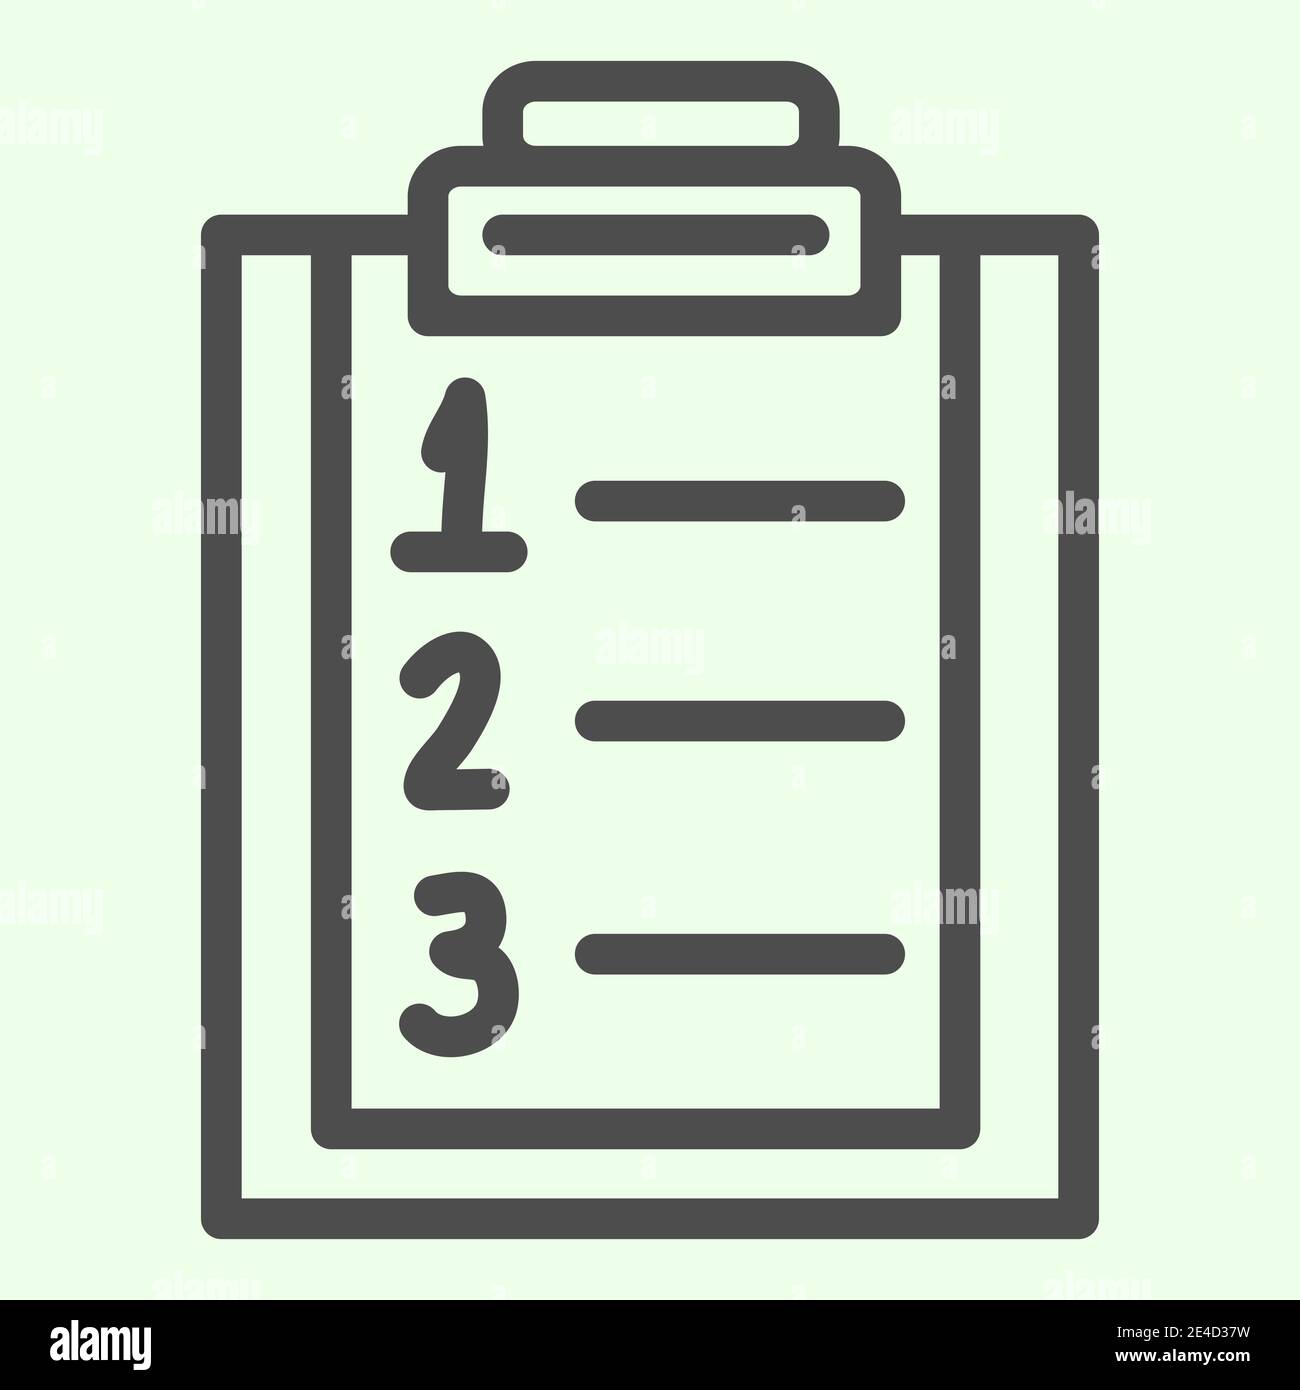 Plan list line icon. Checklist with ranking numbers on clipboard outline style pictogram on white background. Numbered to do plan for mobile concept Stock Vector